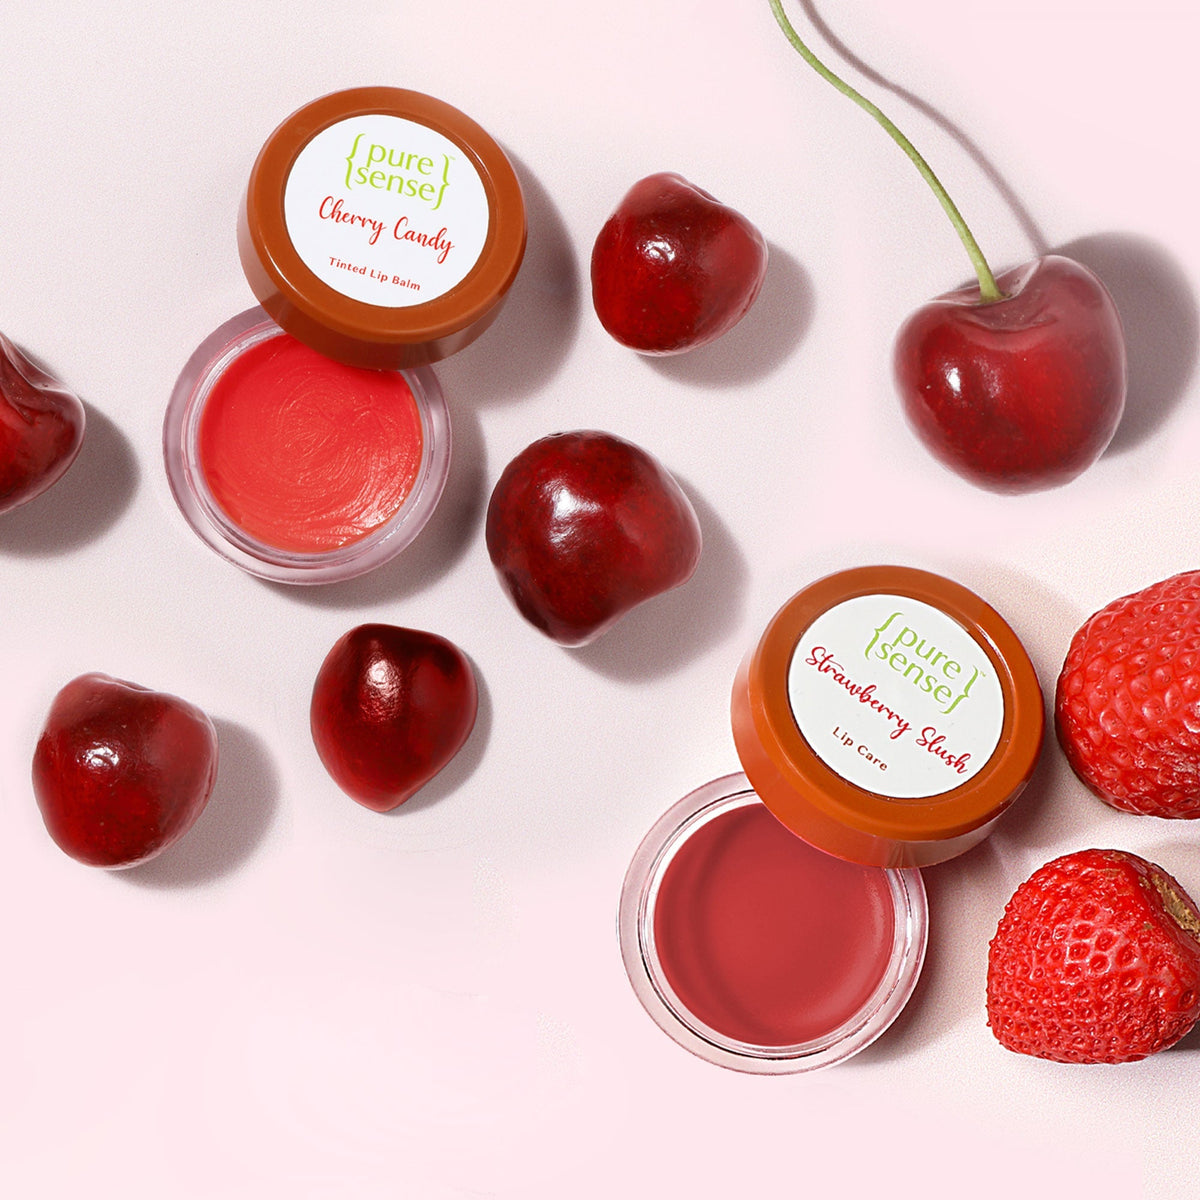 Cherry Candy Tinted Lip Balm 5ml +  Strawberry Slush Lip Balm 5m | Pack of 2 | From the makers of Parachute Advansed | 10ml